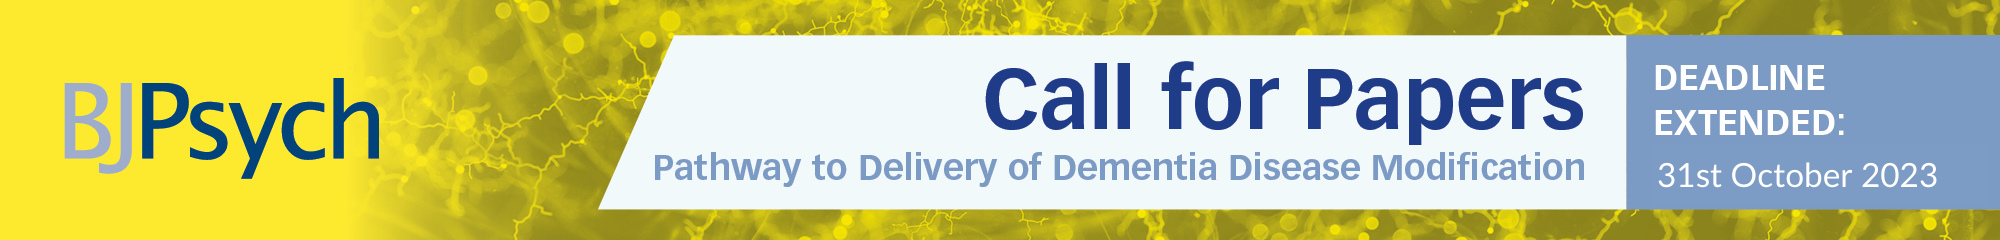 BJPsych Call for Papers for the 2024 Themed Issue on Pathways to Delivery of Dementia Disease Modification